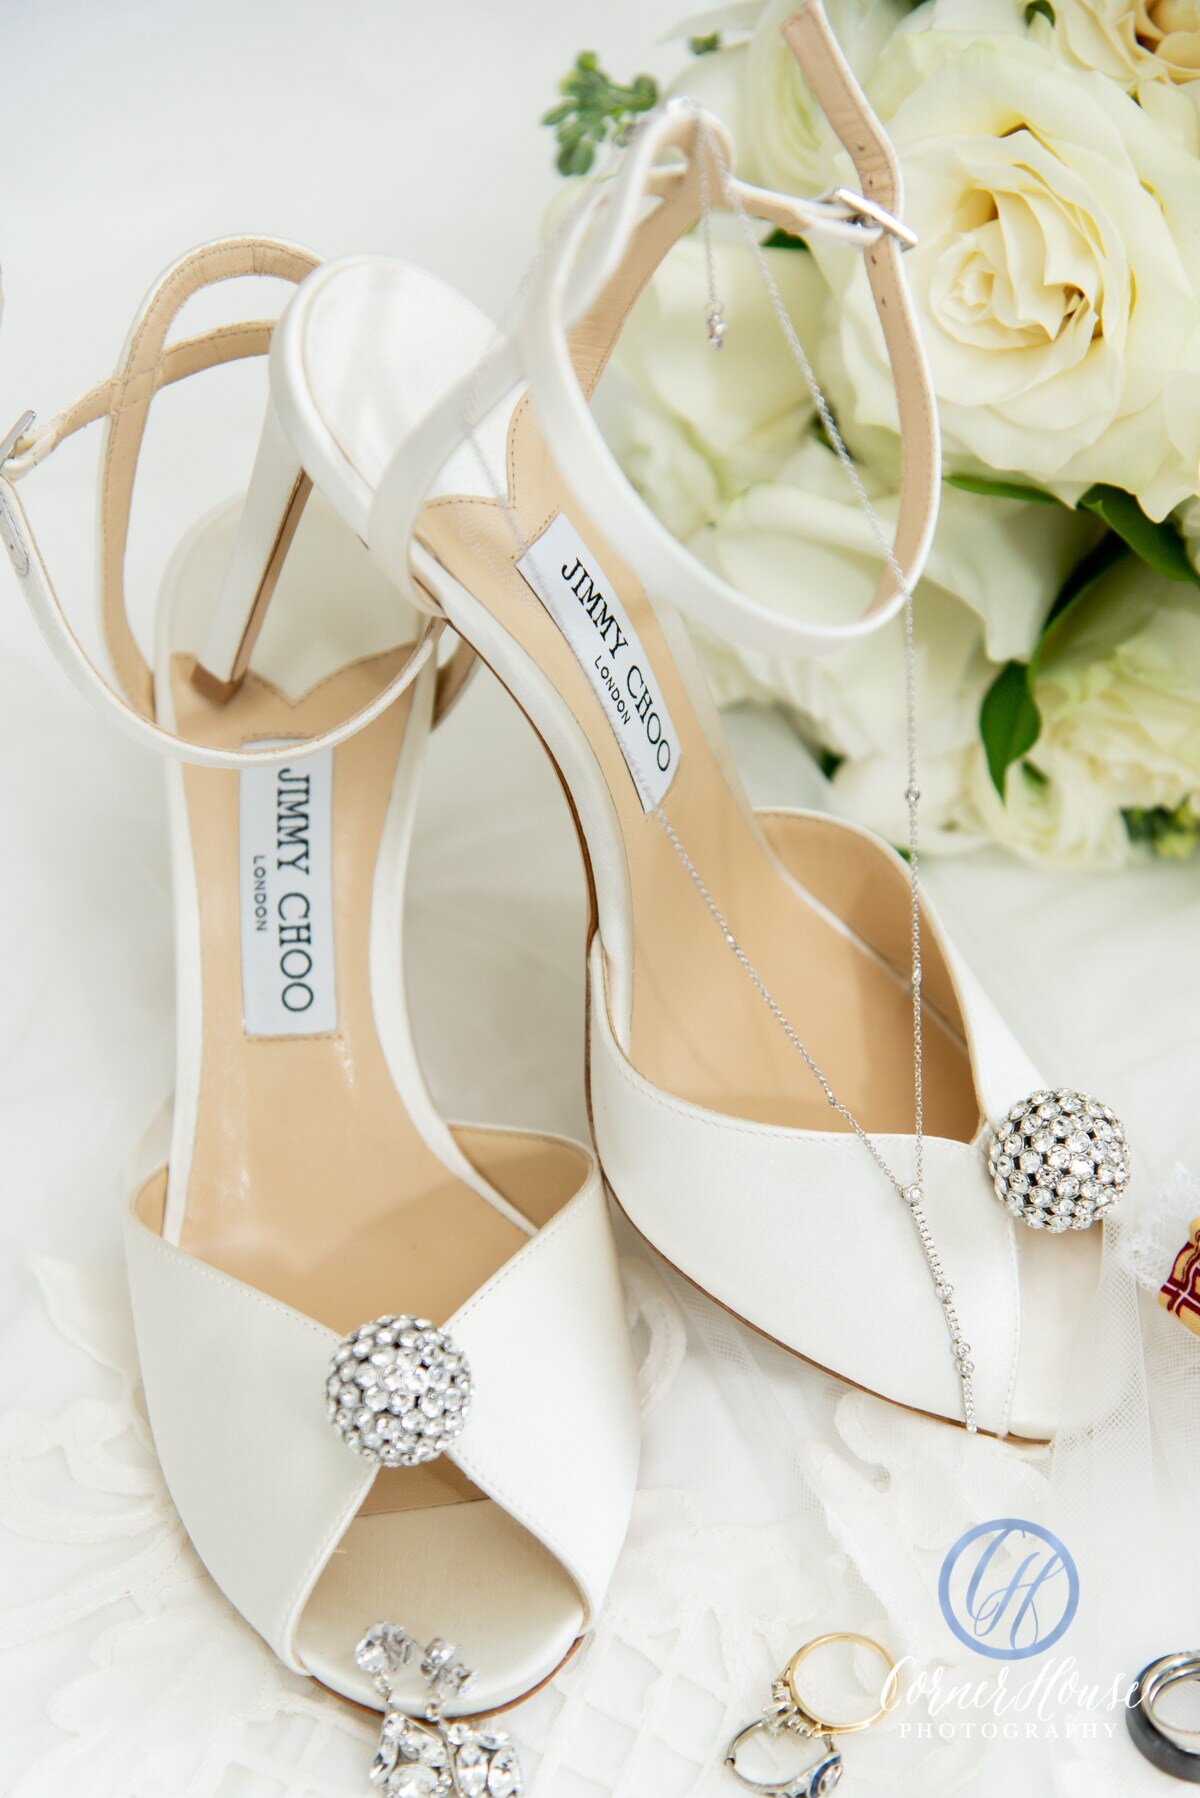 Jimmy Choos & Wedding Shoes - The Miller Affect